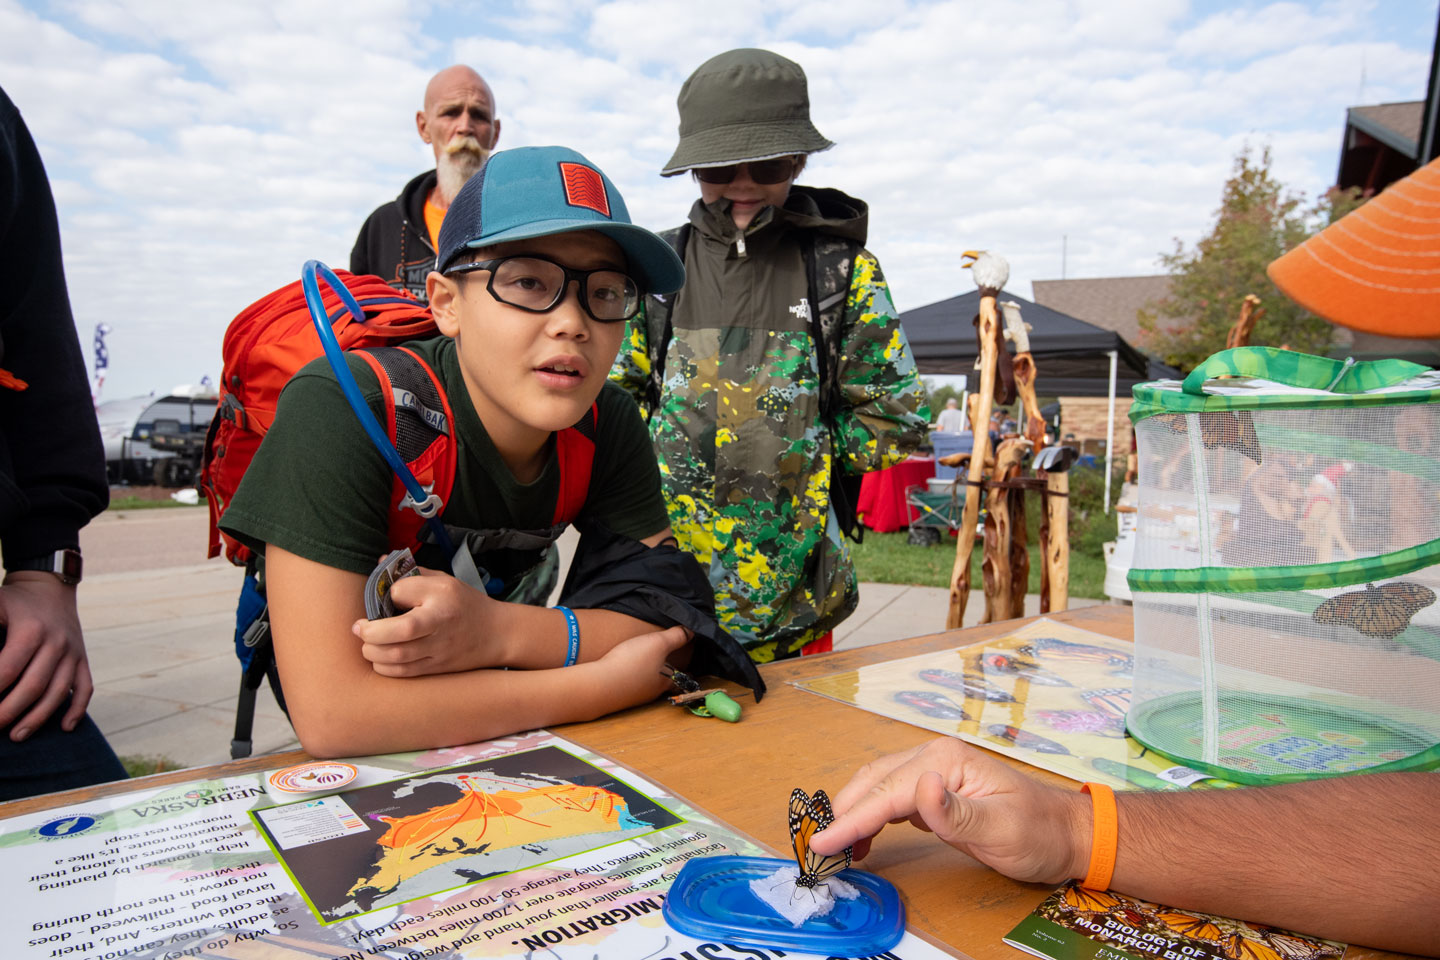 Catch these Game and Parks education events in June